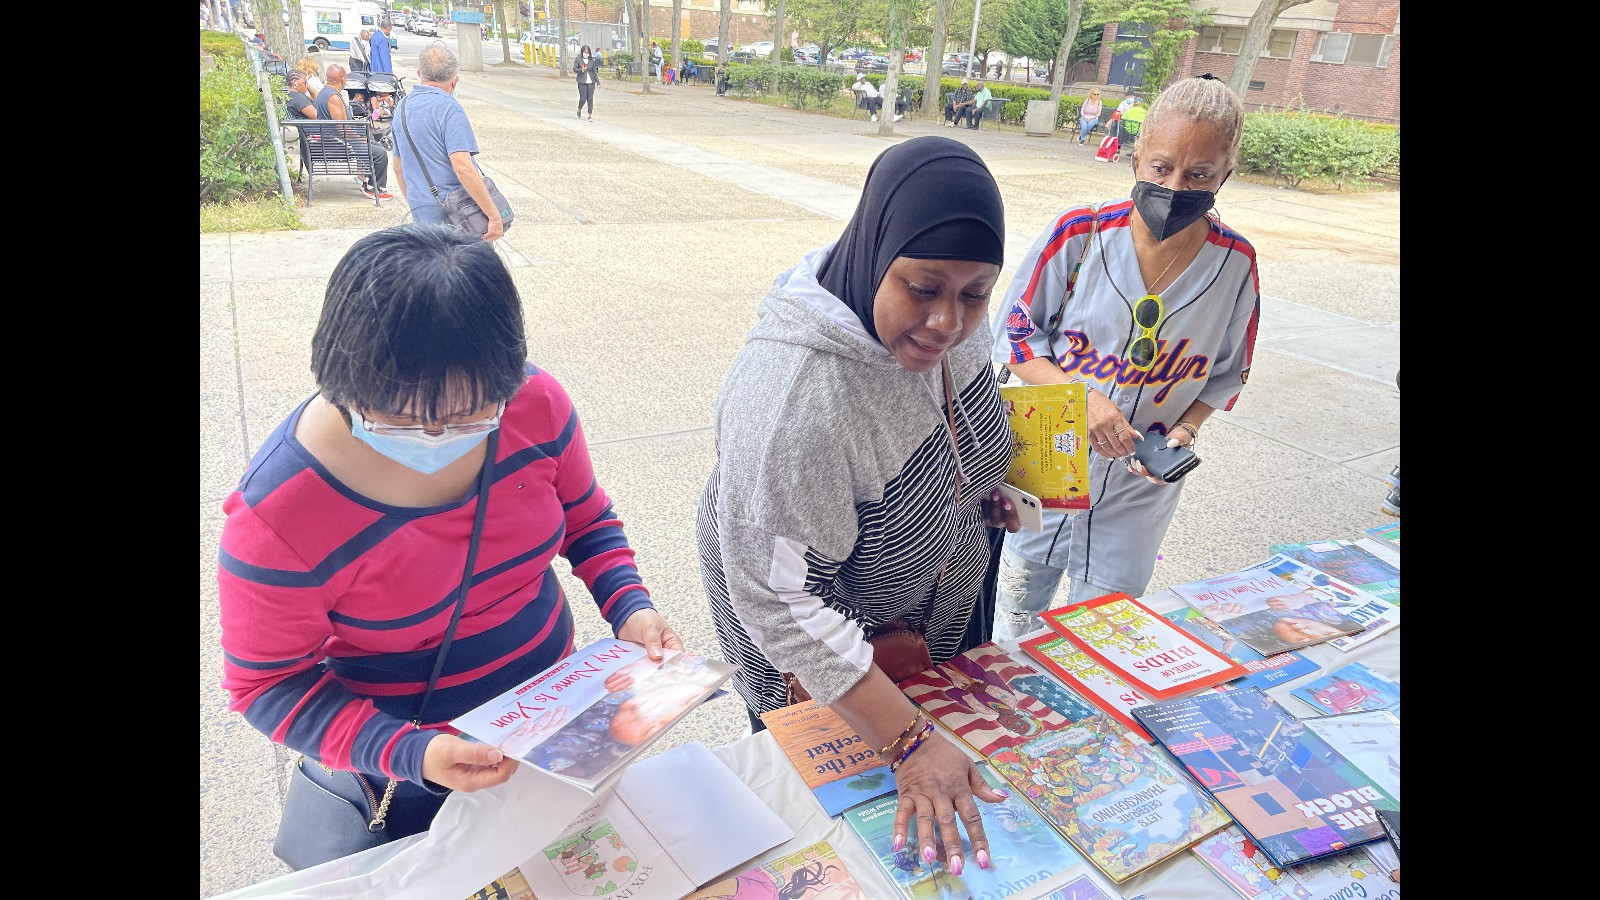 Parents Finding Best Books for Their Kids at ILD